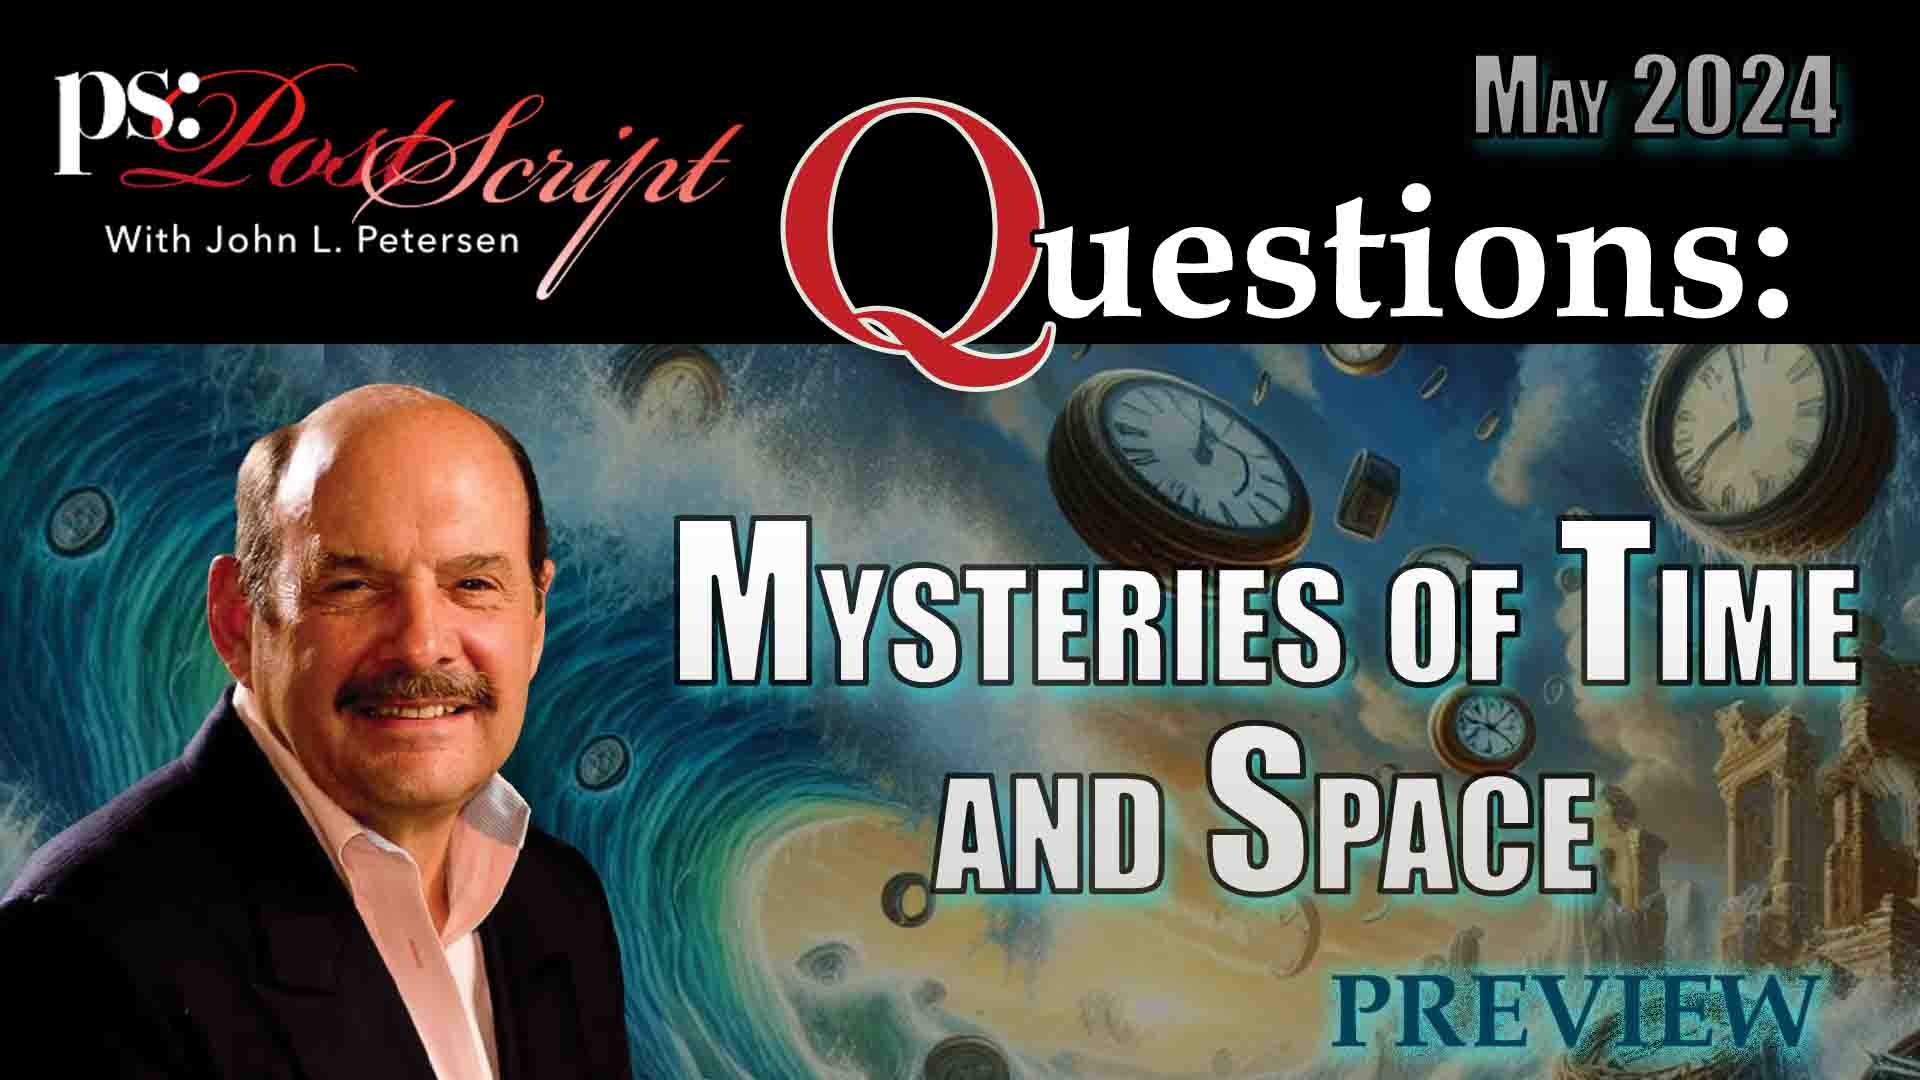 The Mysteries of Time, Space, and the Human Experience - PostScript Questions with John L. Petersen. Questions submitted this month include: